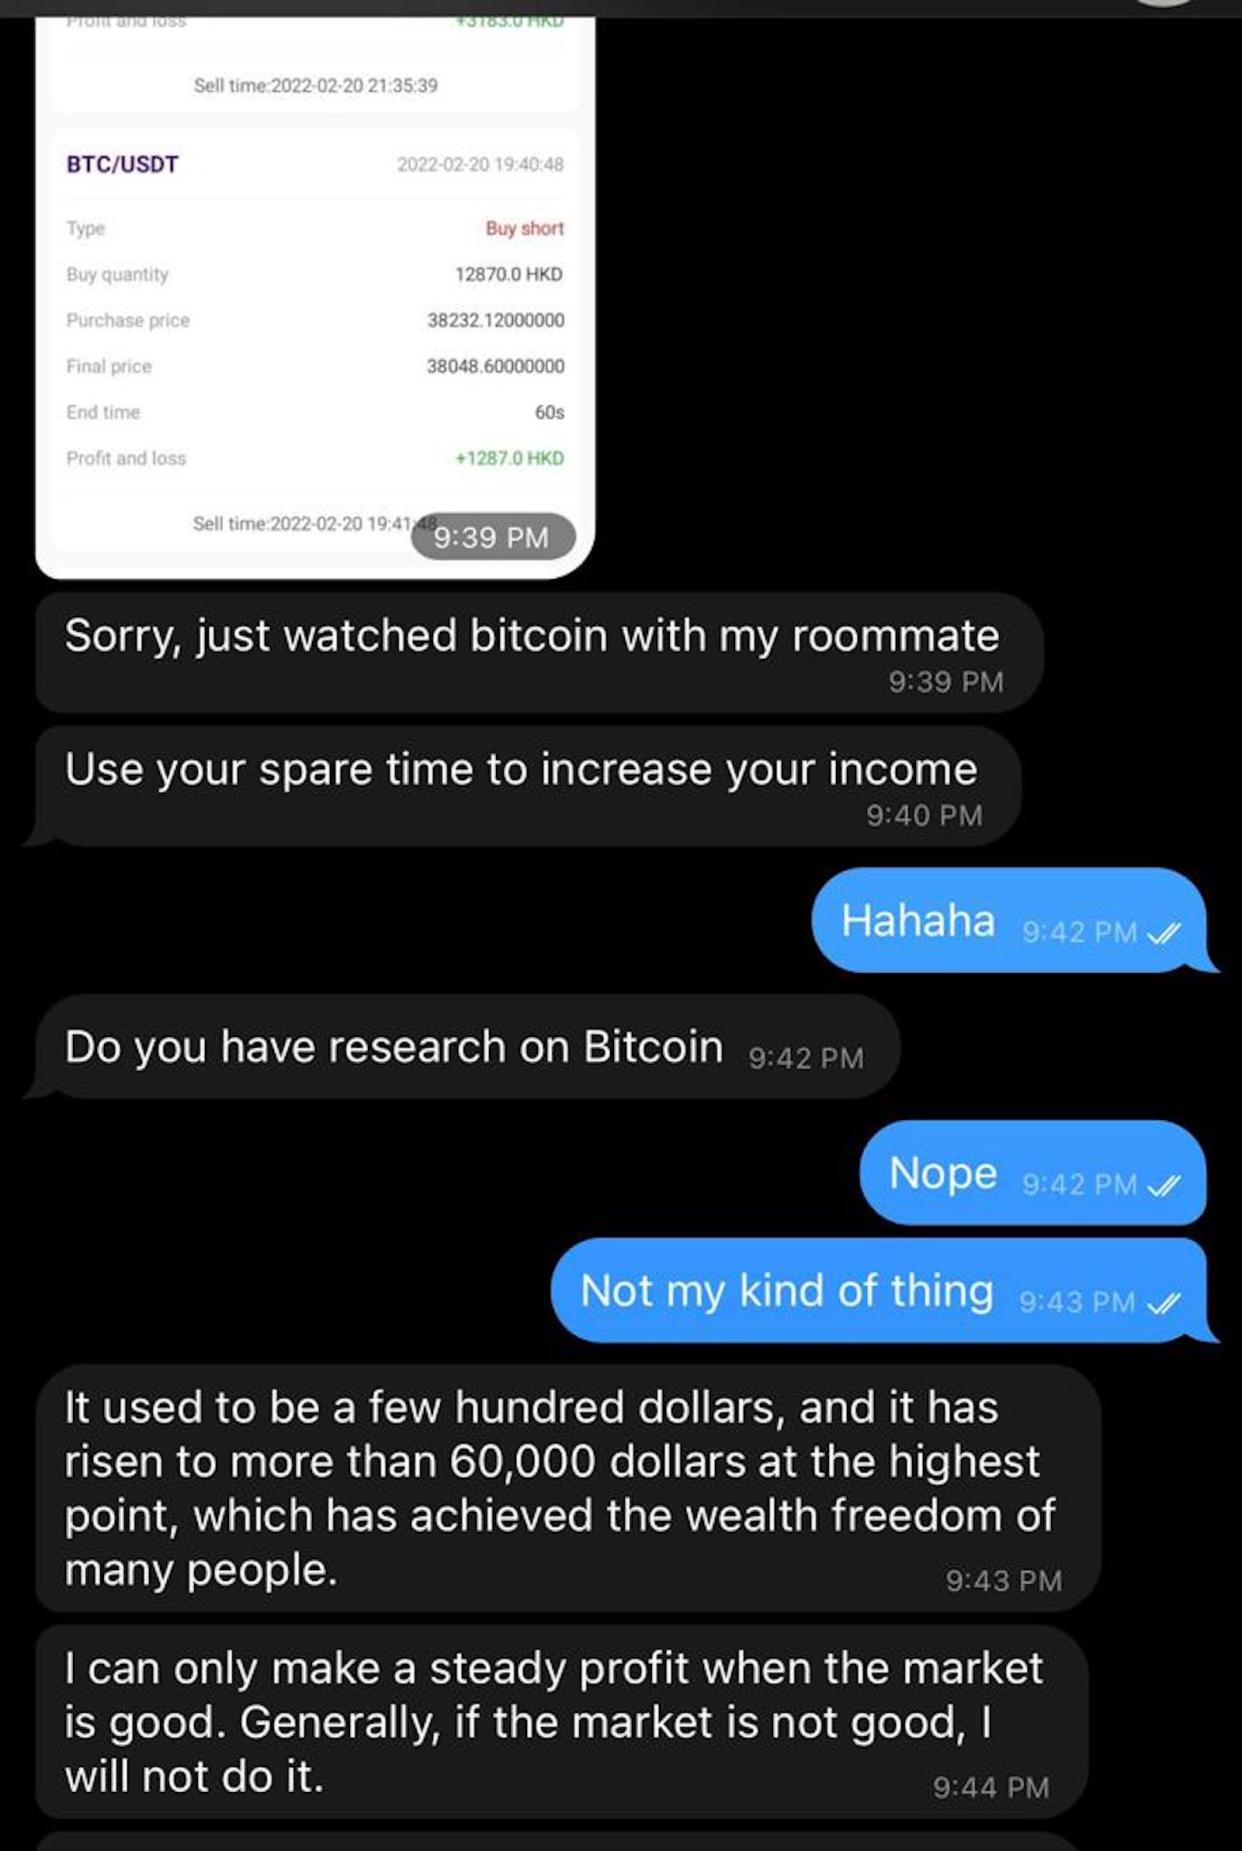 In an interview with Yahoo News Singapore, Lisa shared a screenshot of a conversation she had with the scammer who tried to get her to join bitcoin.